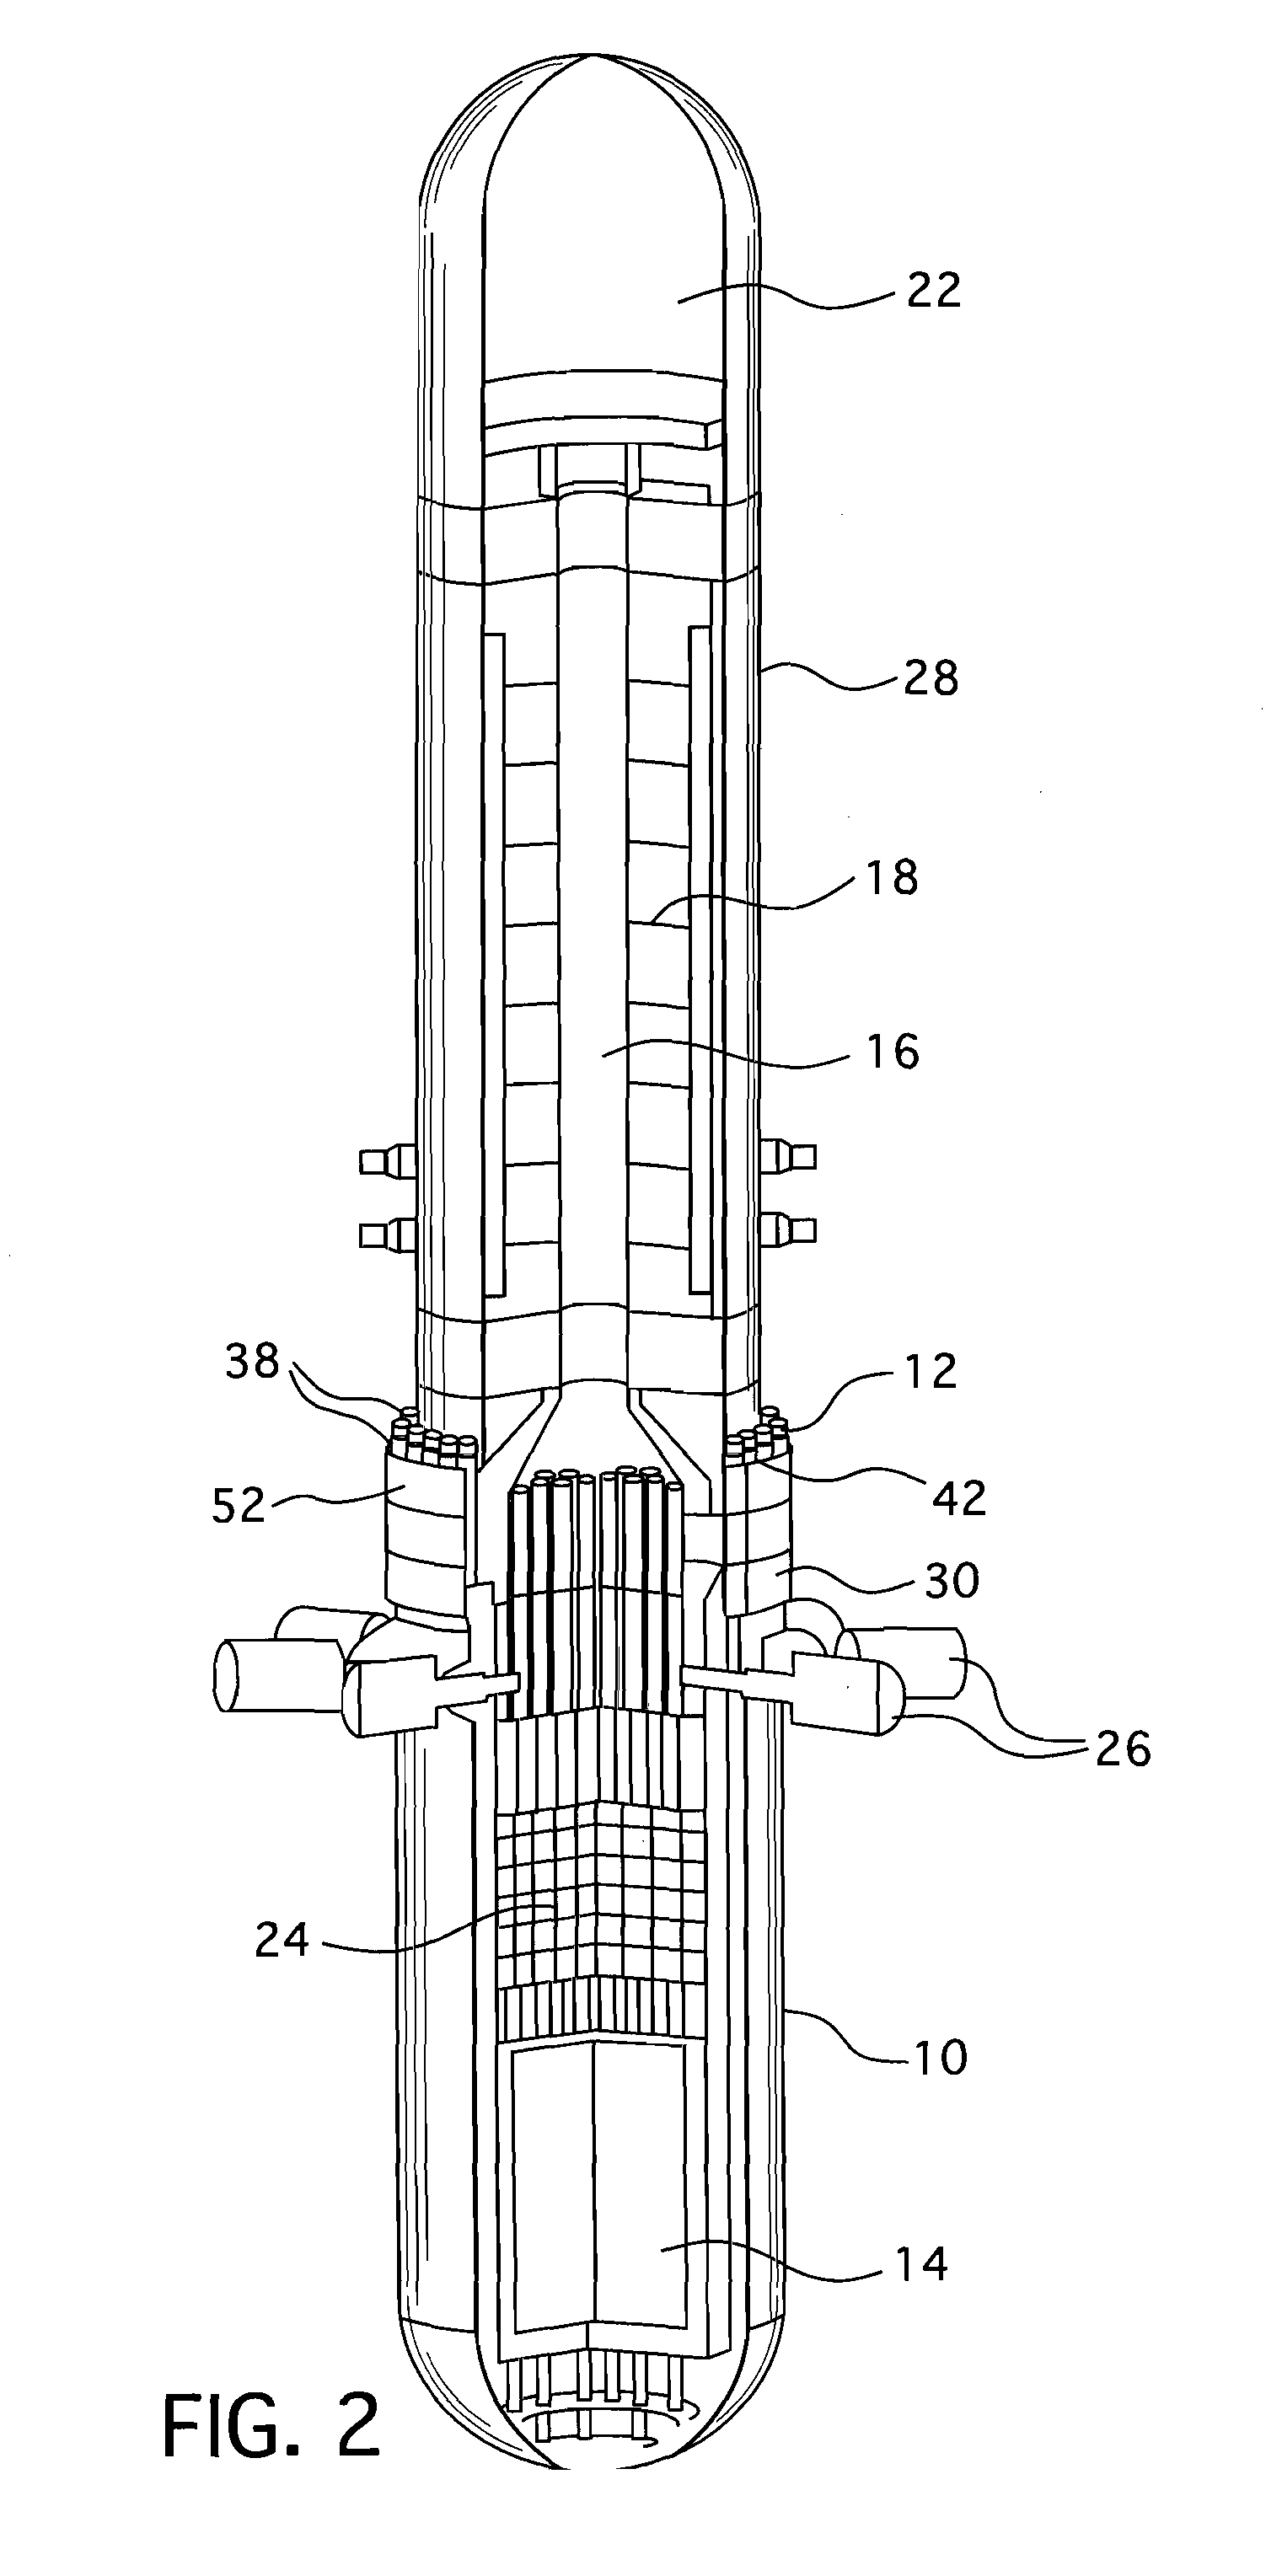 Method of refueling a nuclear reactor